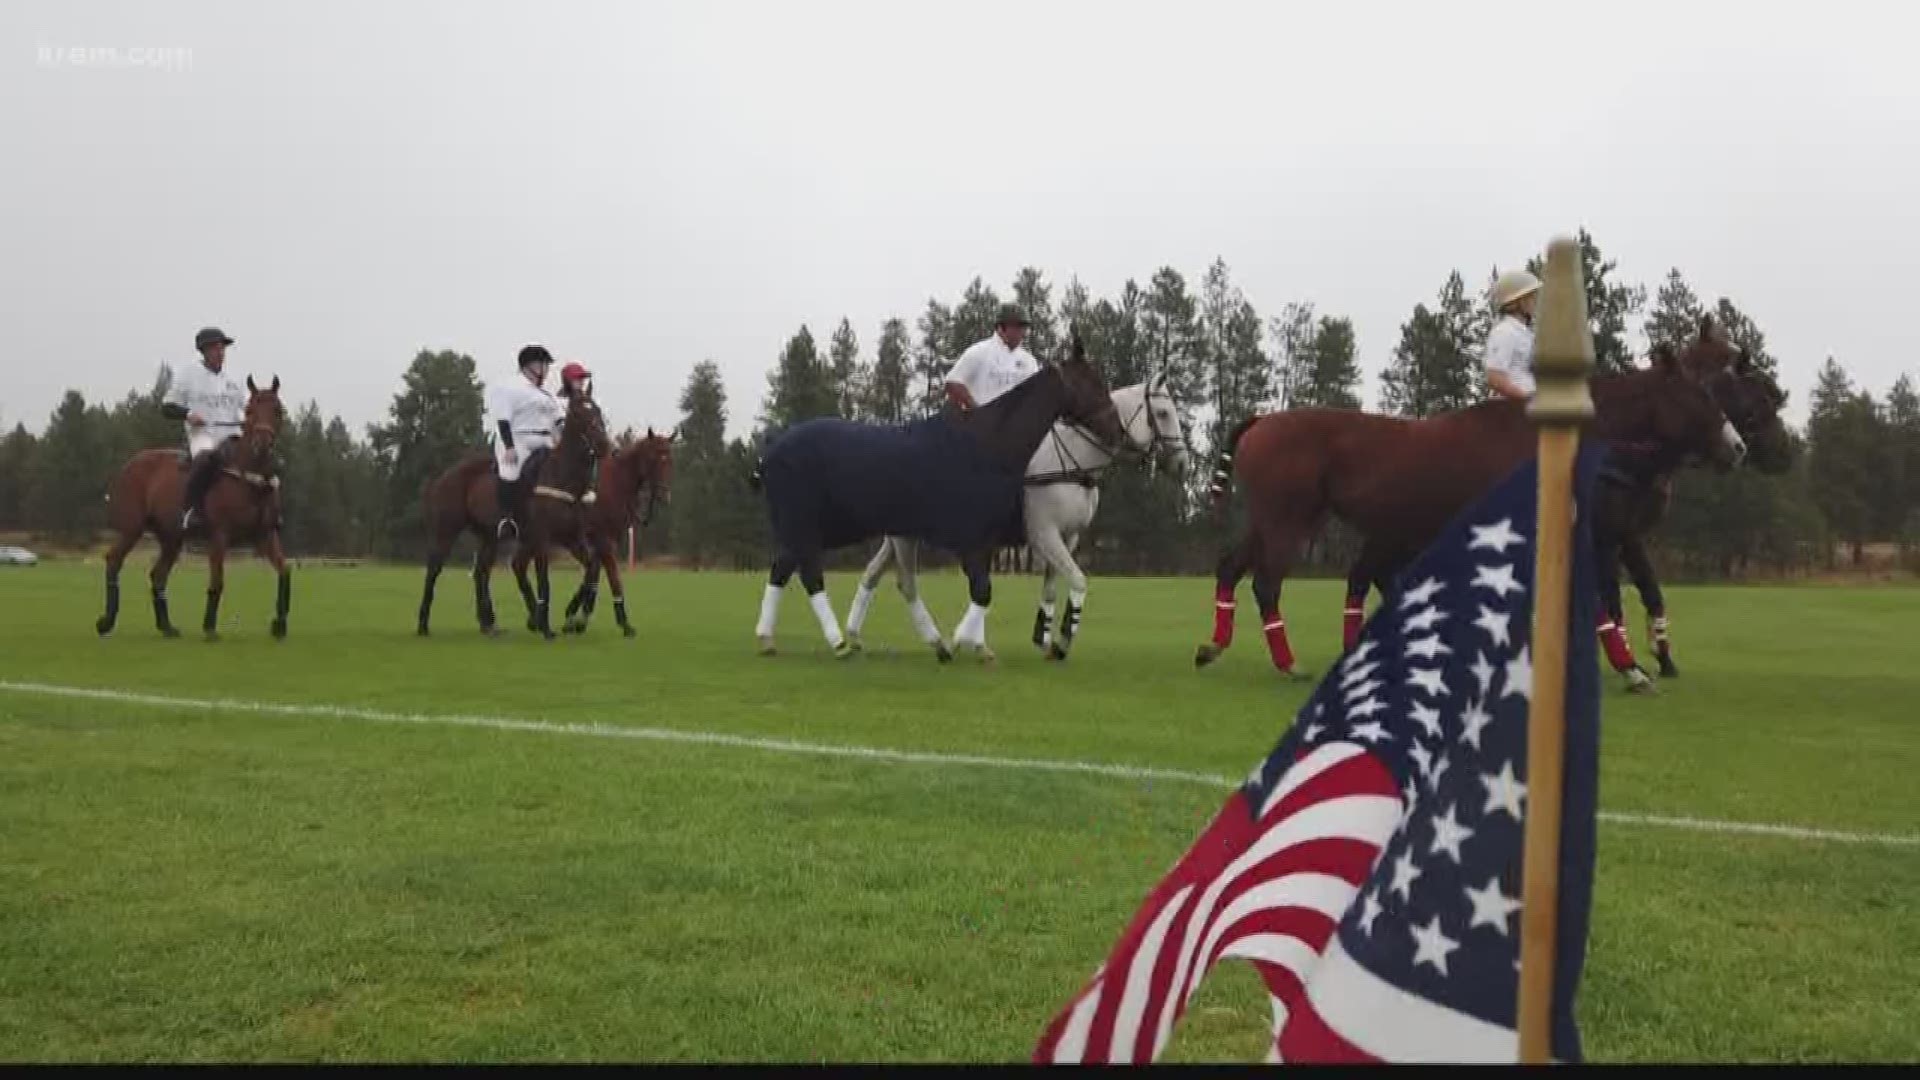 Airway Heights polo event raises money for Ronald McDonald House Charities